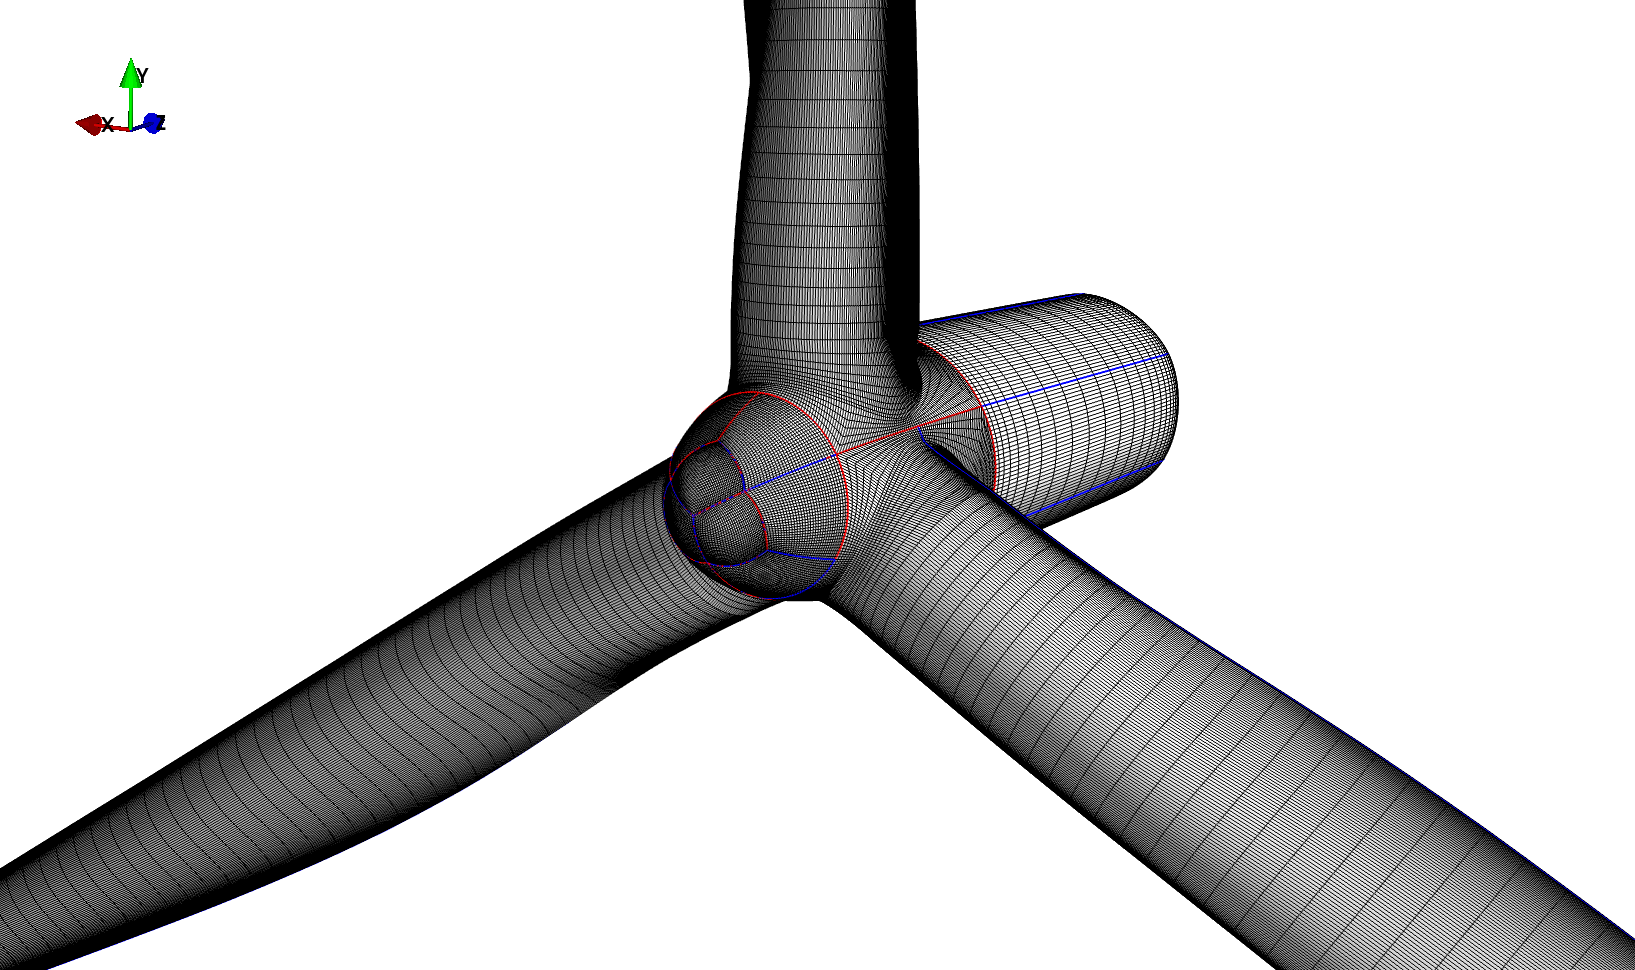 _images/rotor_with_nacelle.png